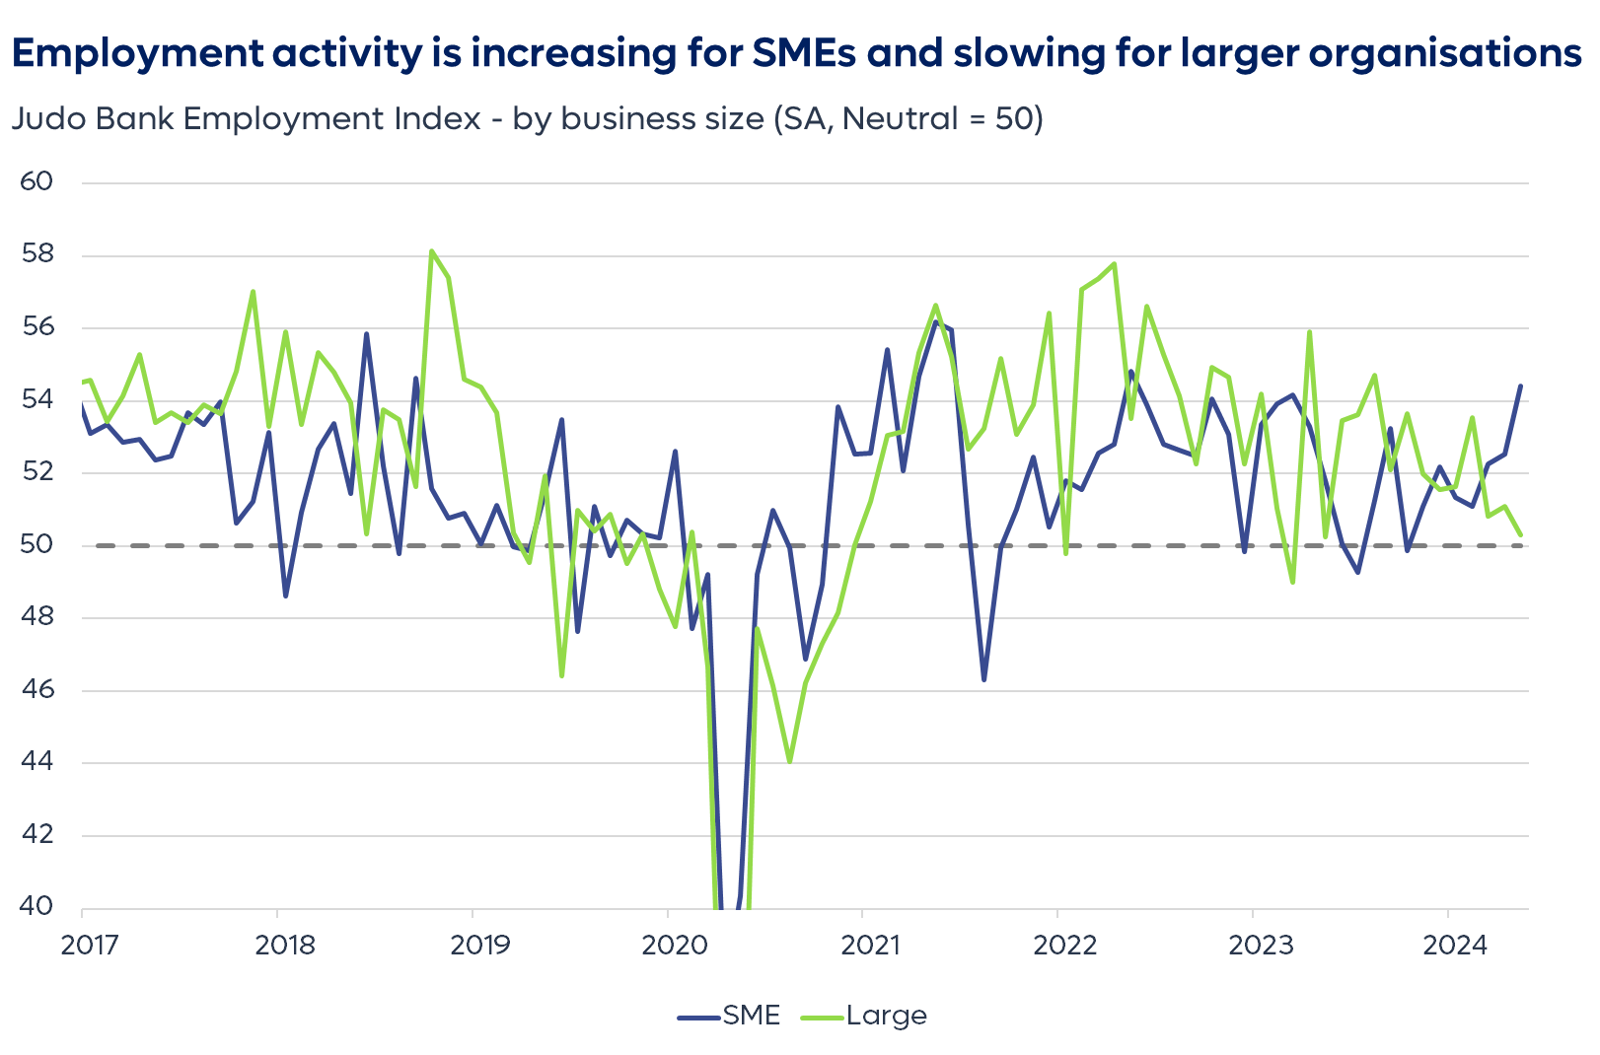 Employment intentions are rising for small businesses and falling for large ones